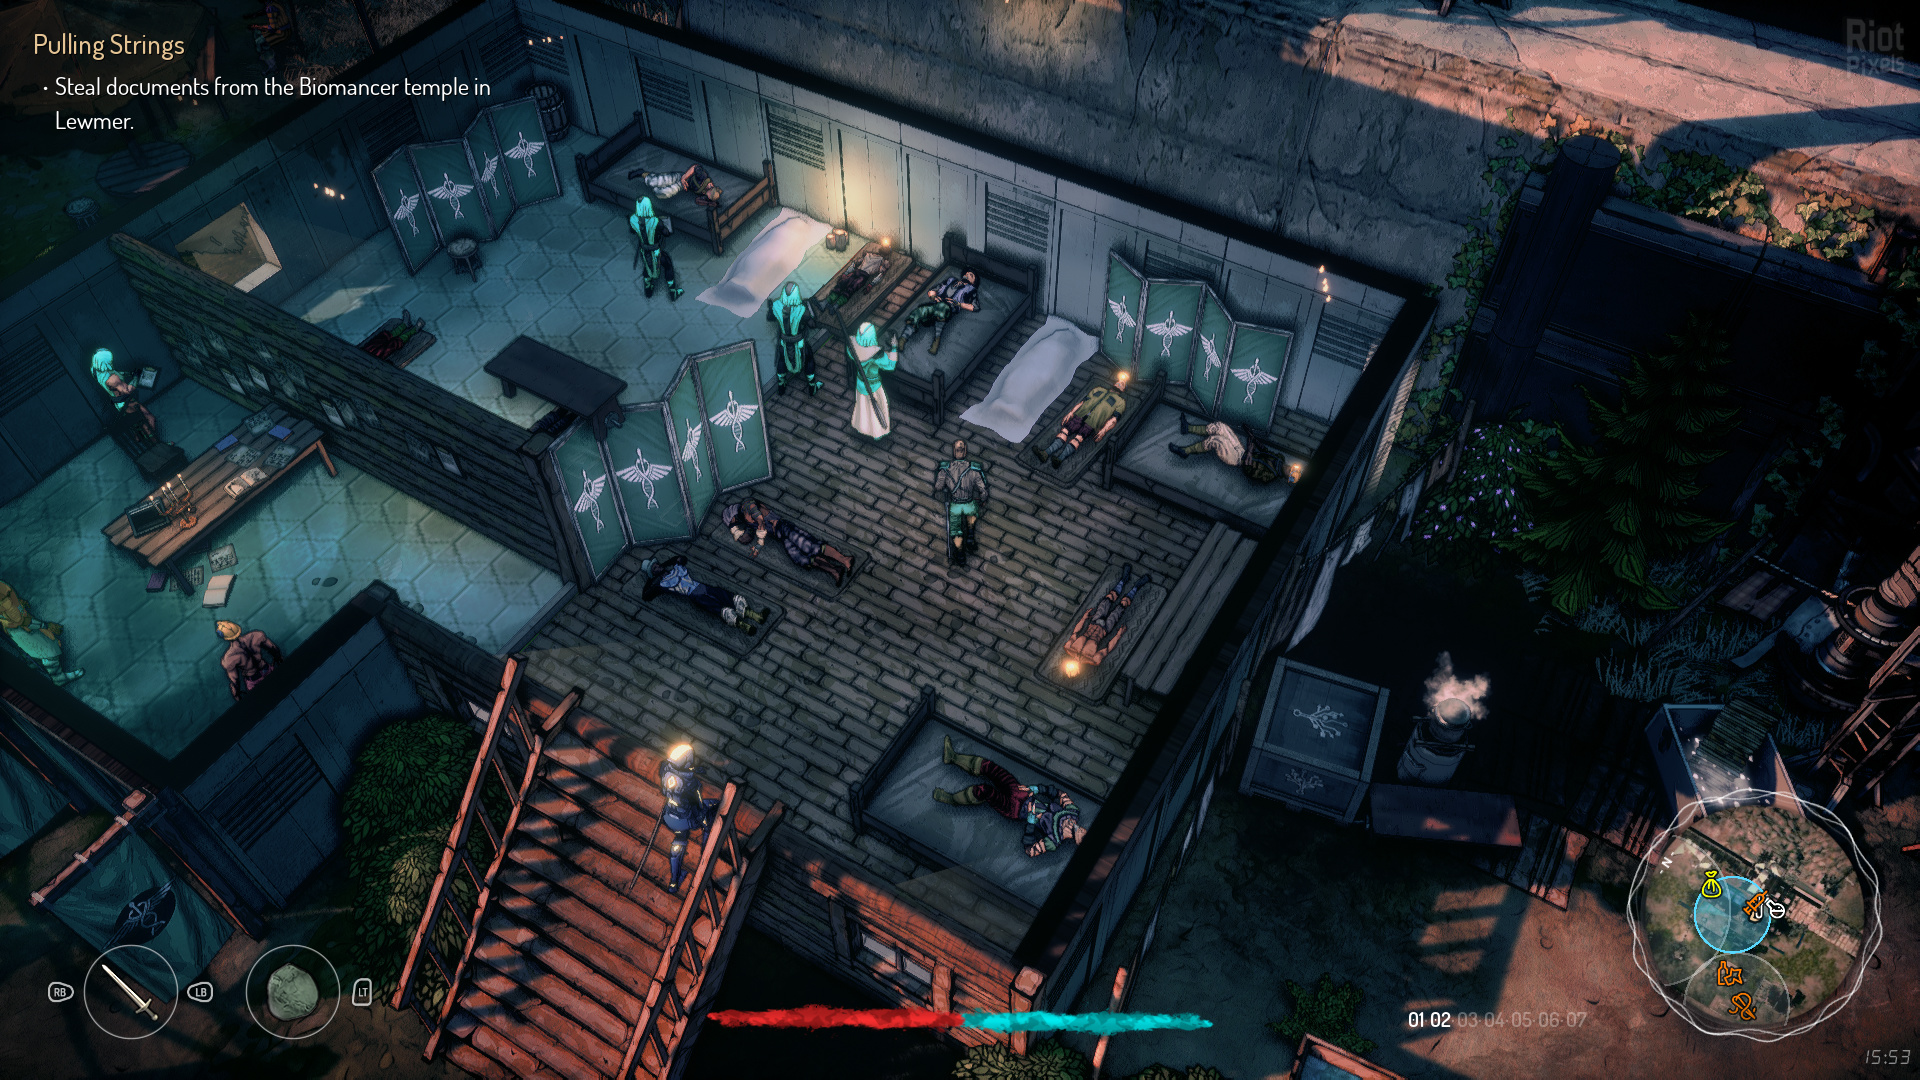 Análise: Seven: The Days Long Gone (PC) une RPG, stealth, parkour e  gameplay confuso - GameBlast